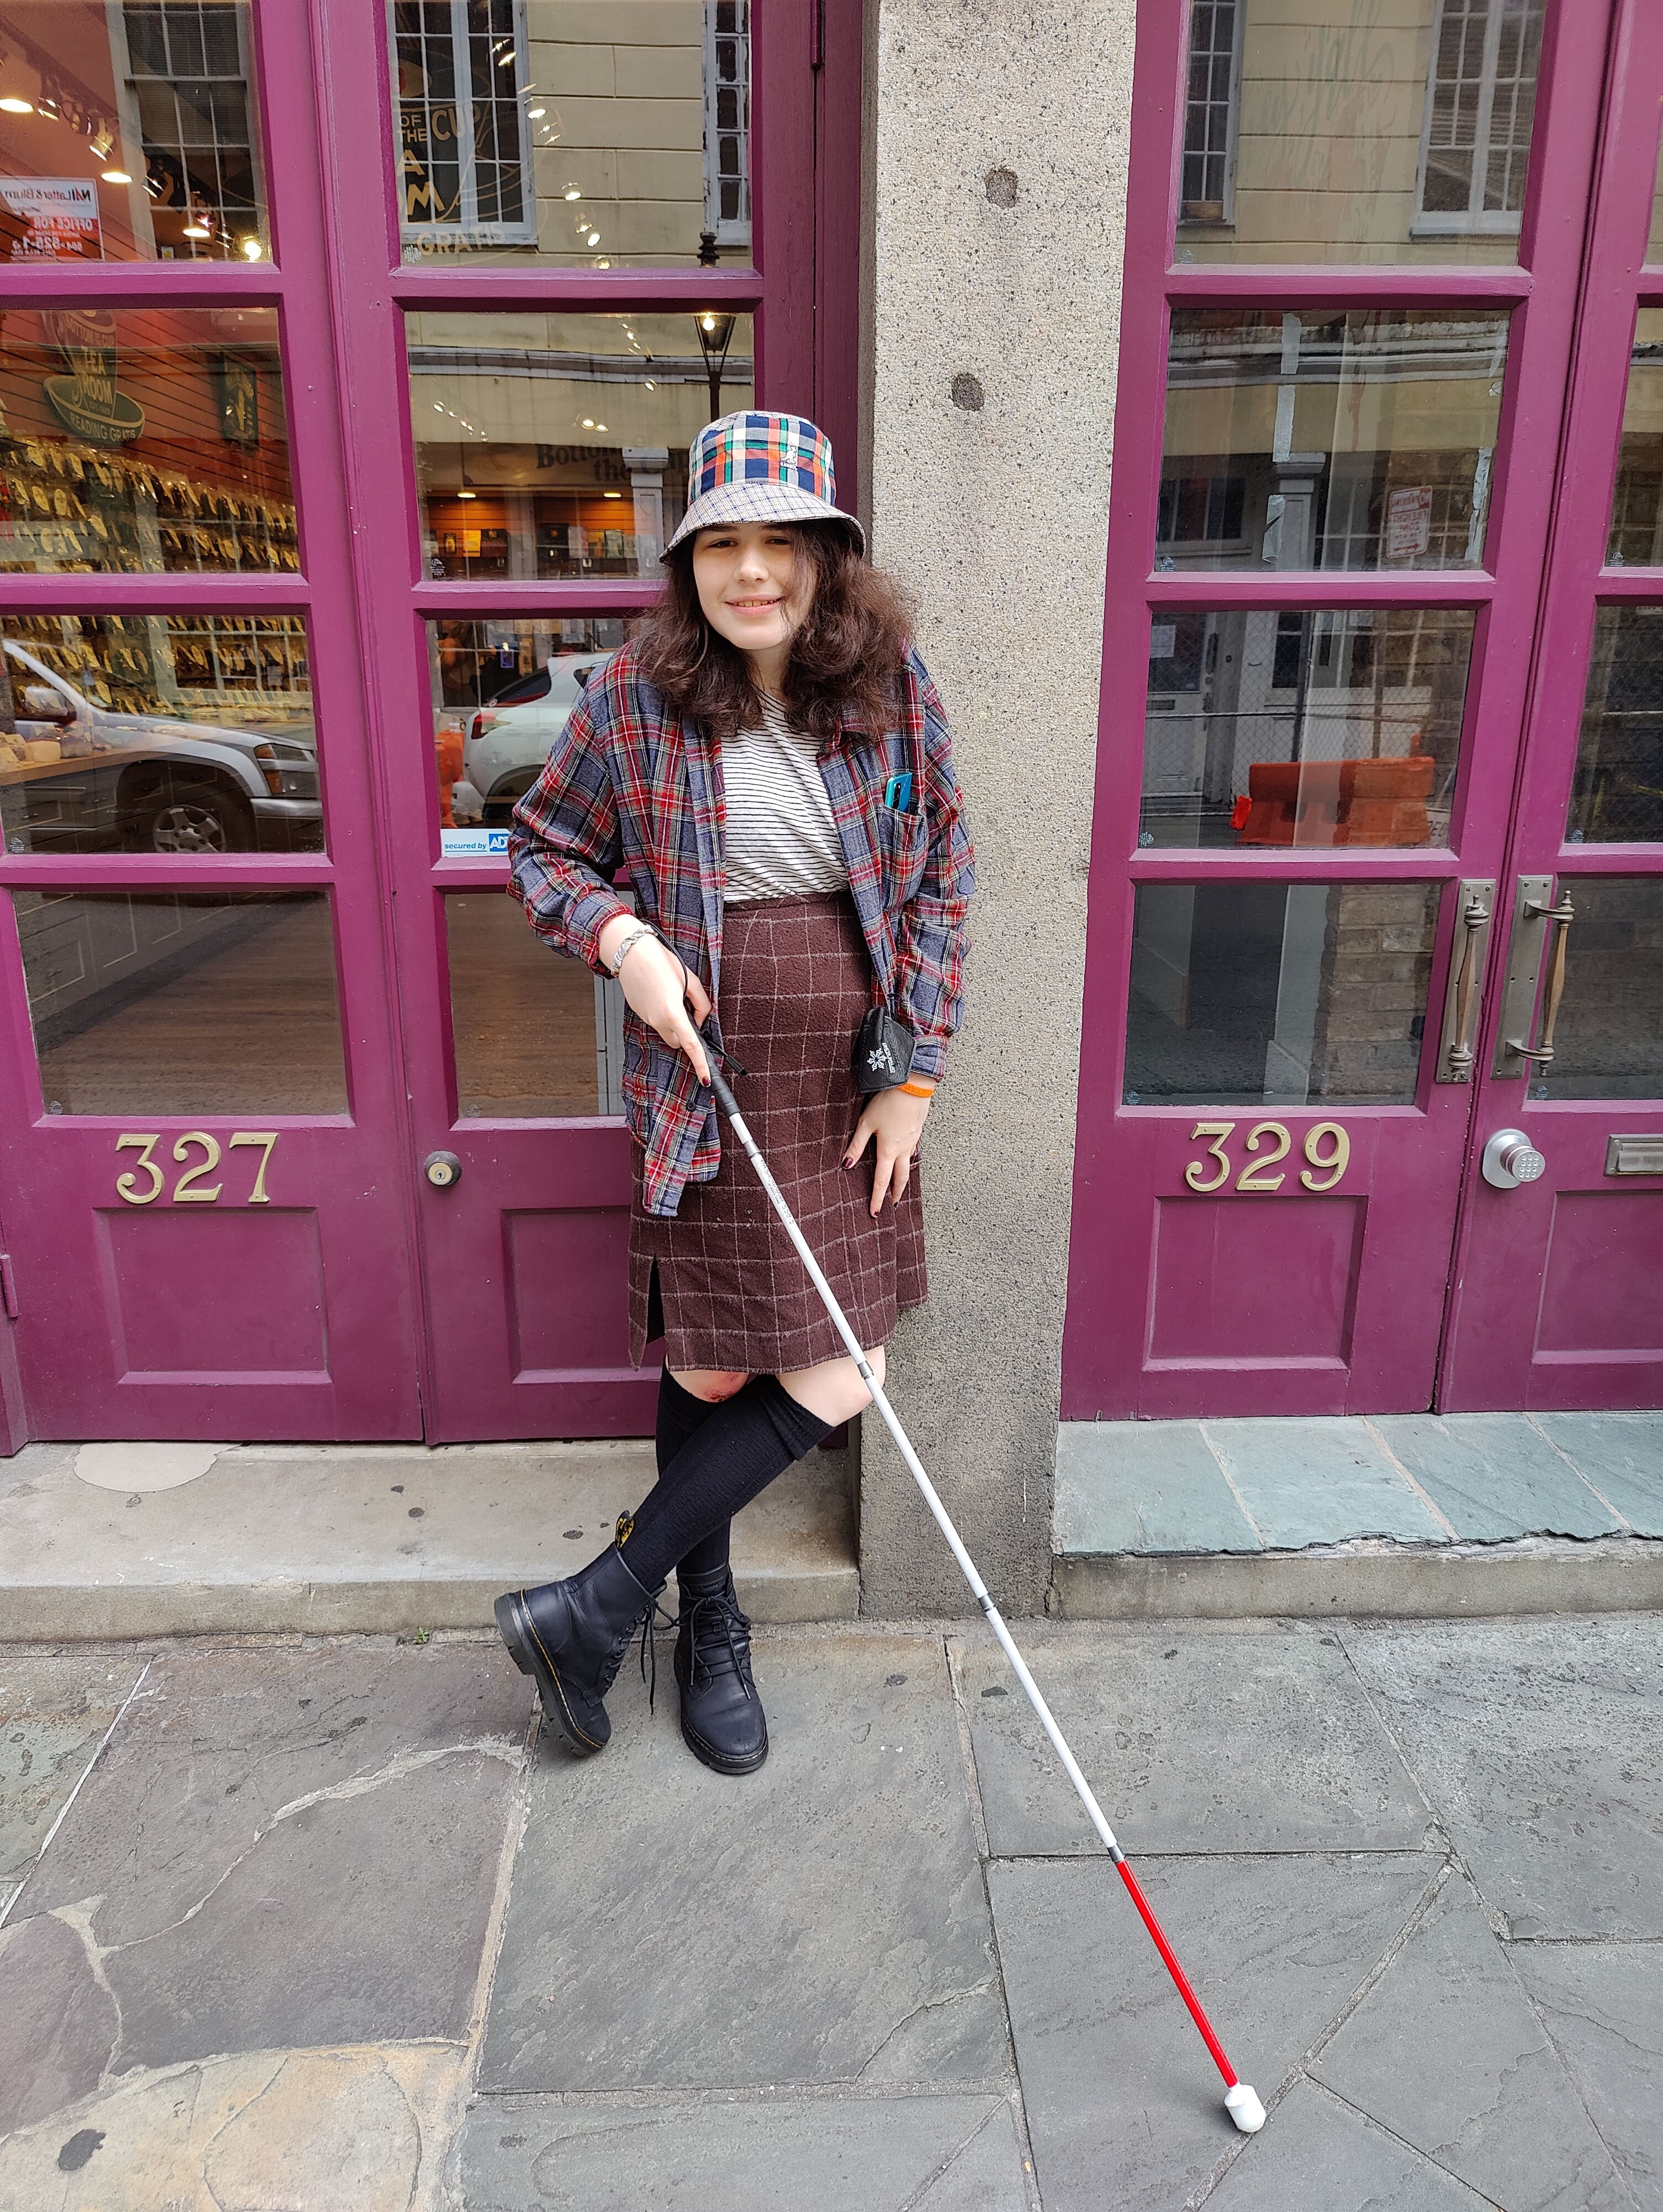 A Picture of me standing on a new-orleans street corner. I'm wearing a plaid shirt and skirt, knee-high stockings, and a cool new bucket hat!